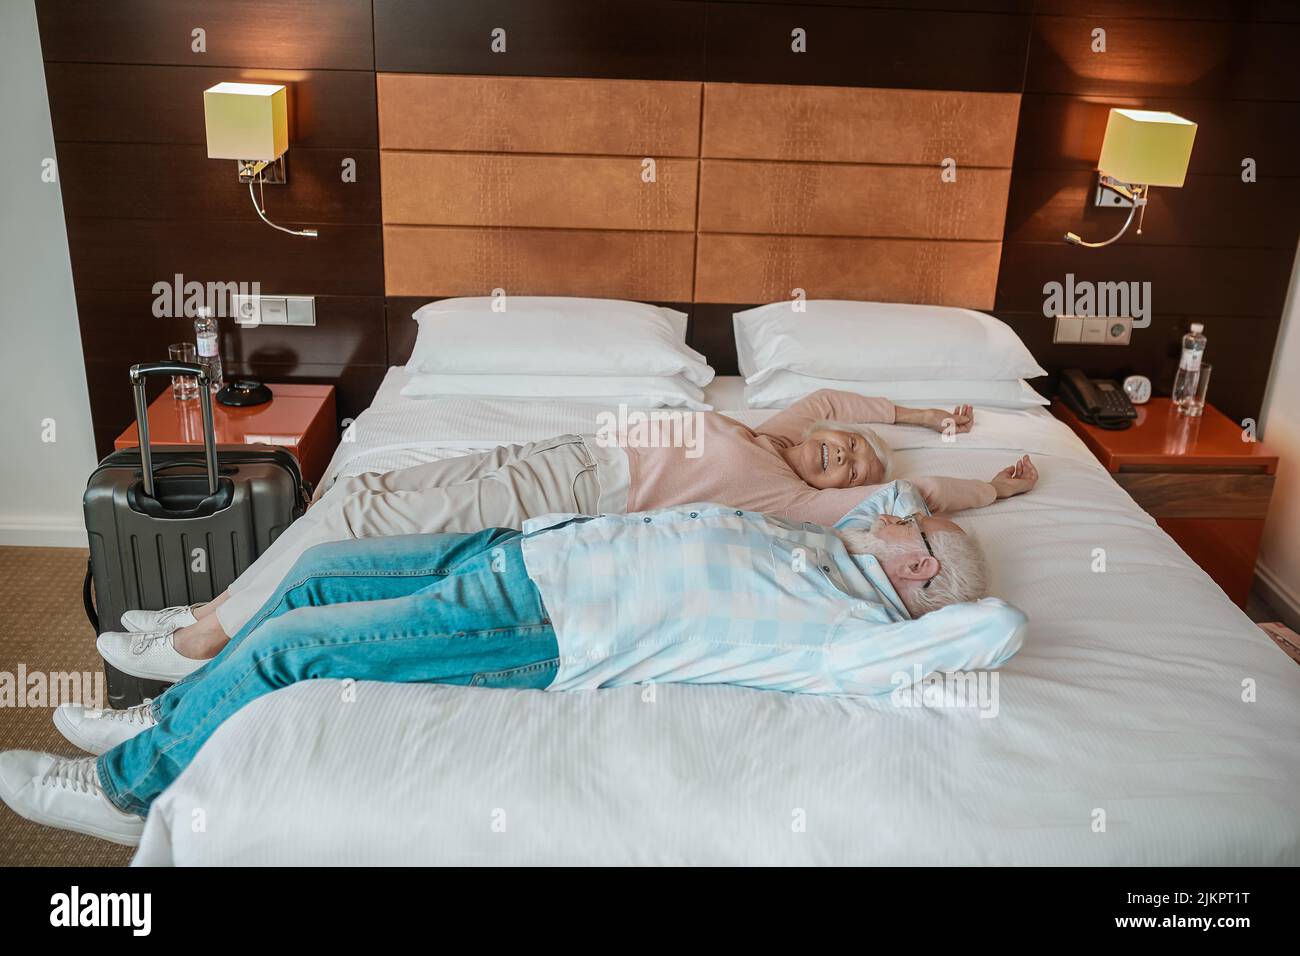 Two people lying on a bed and looking relaxed Stock Photo